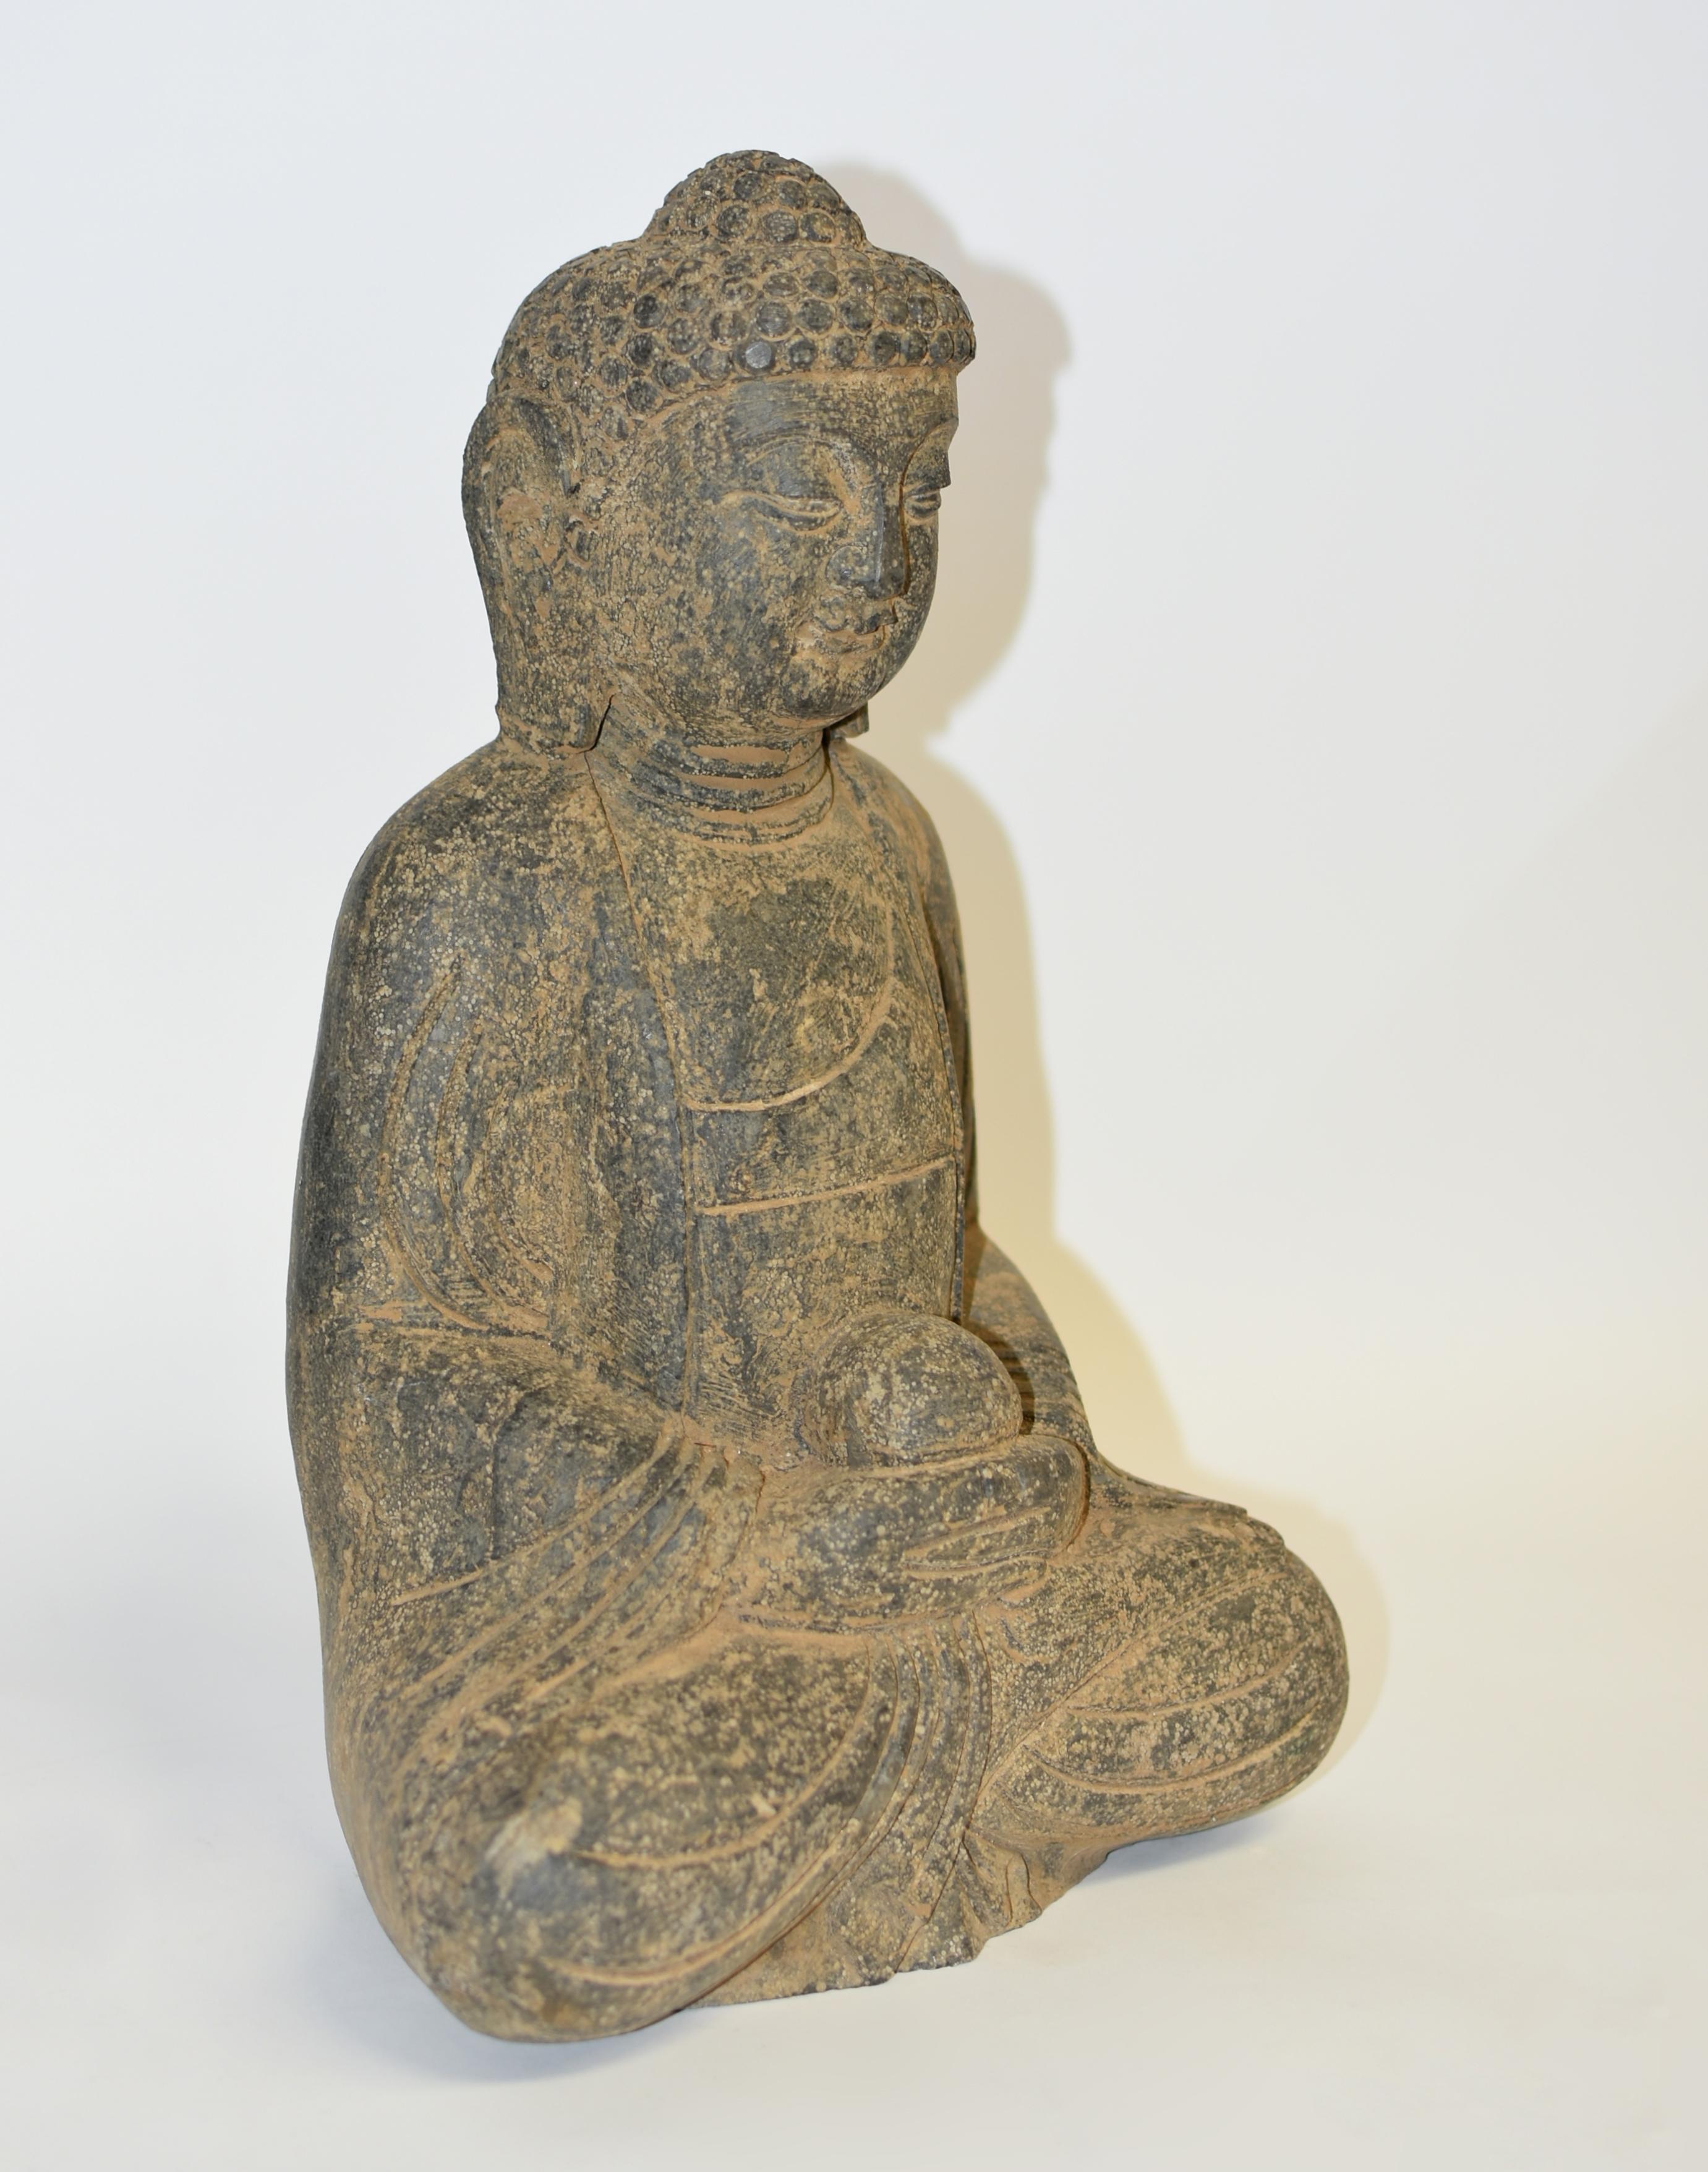 Chinese Stone Buddha with Smiling Countenance 37 lb For Sale